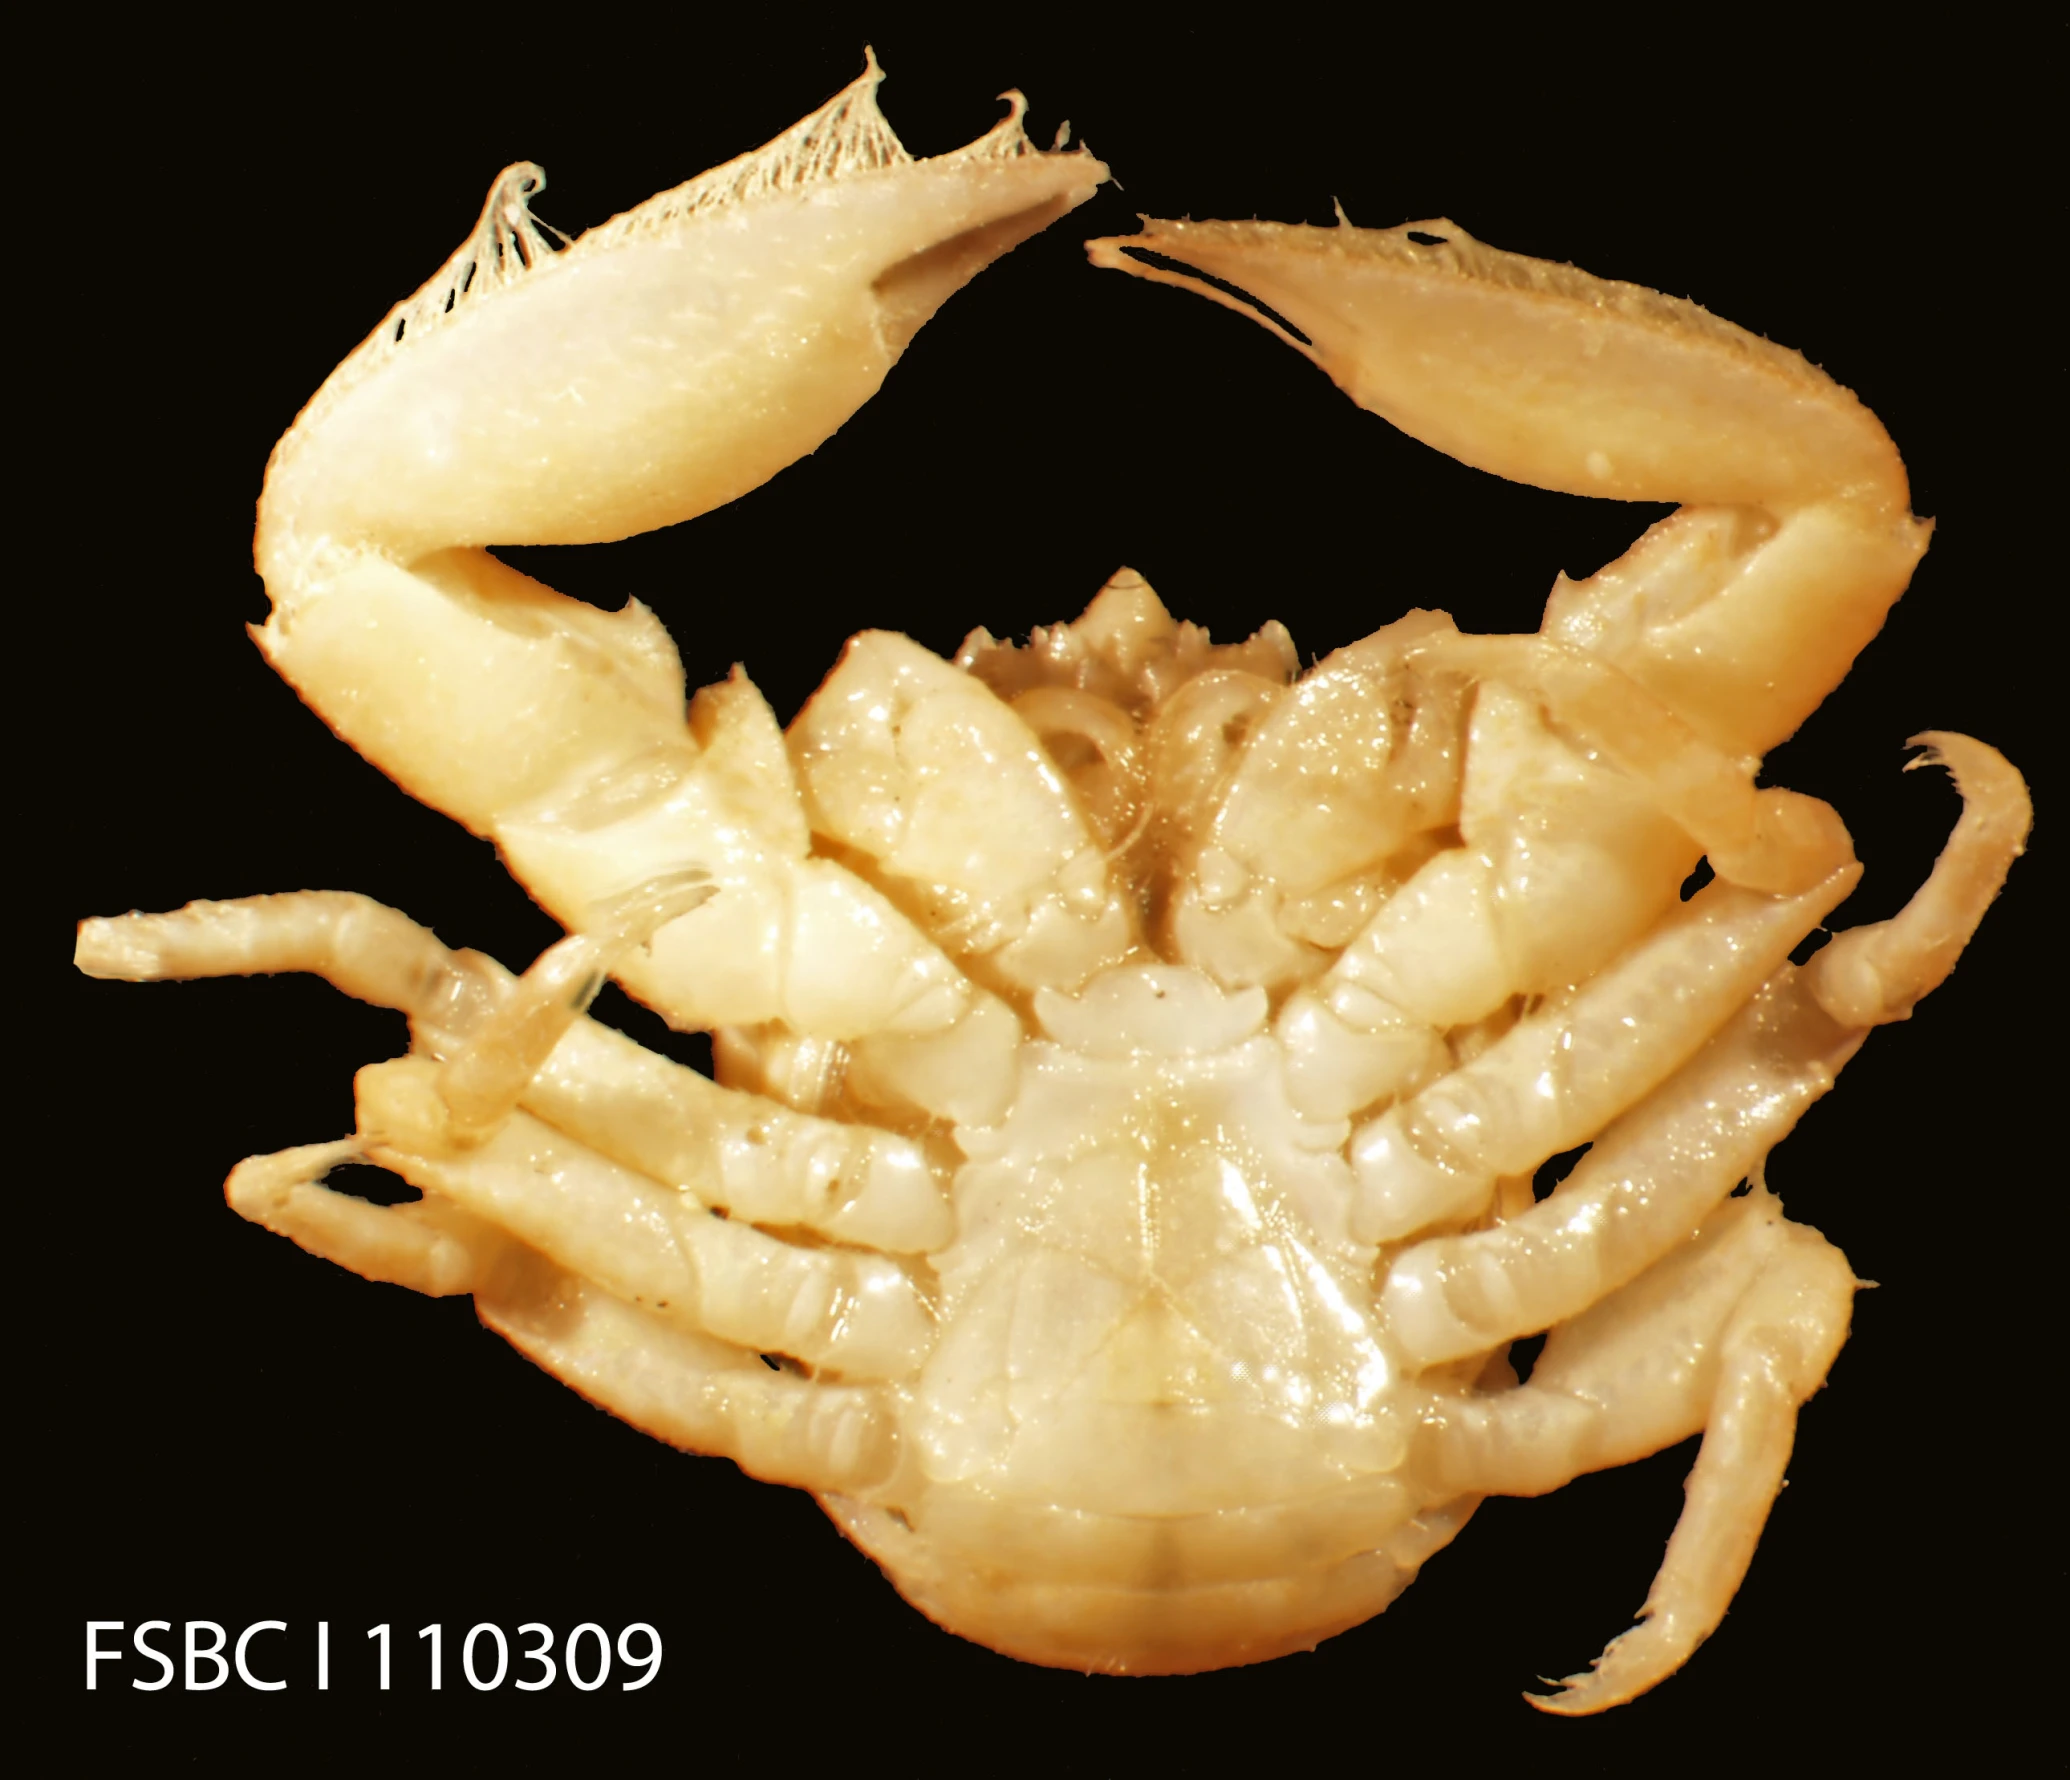 the front part of a crab showing two claws